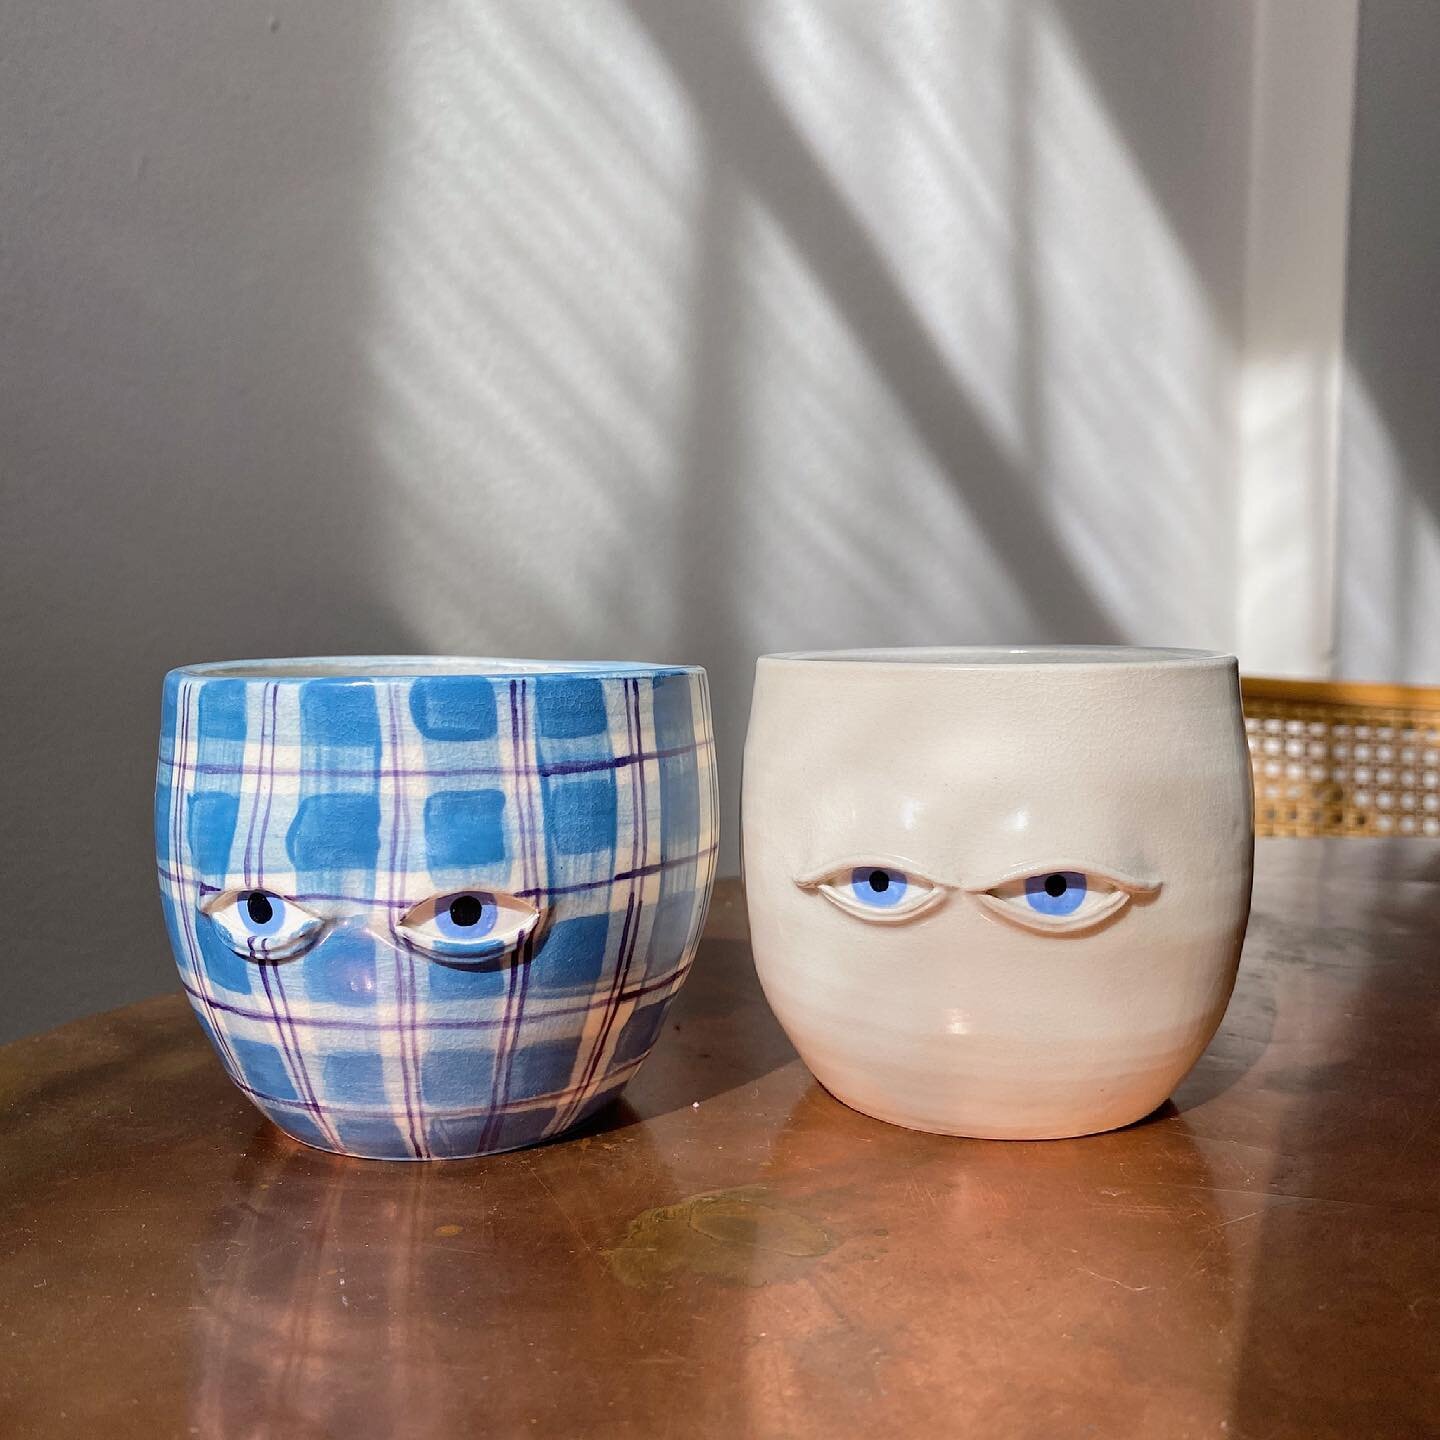 Happy Friday everyone!! These two and more are now available on my website 

Link in bio
&bull;
&bull;
&bull;
&bull;
&bull;
&bull;
#ceramicsofinstagram #shopupdate #cupset #handmade #handmadeceramics #blueplaid #ceramicfriends #sleepycups #ceramicart